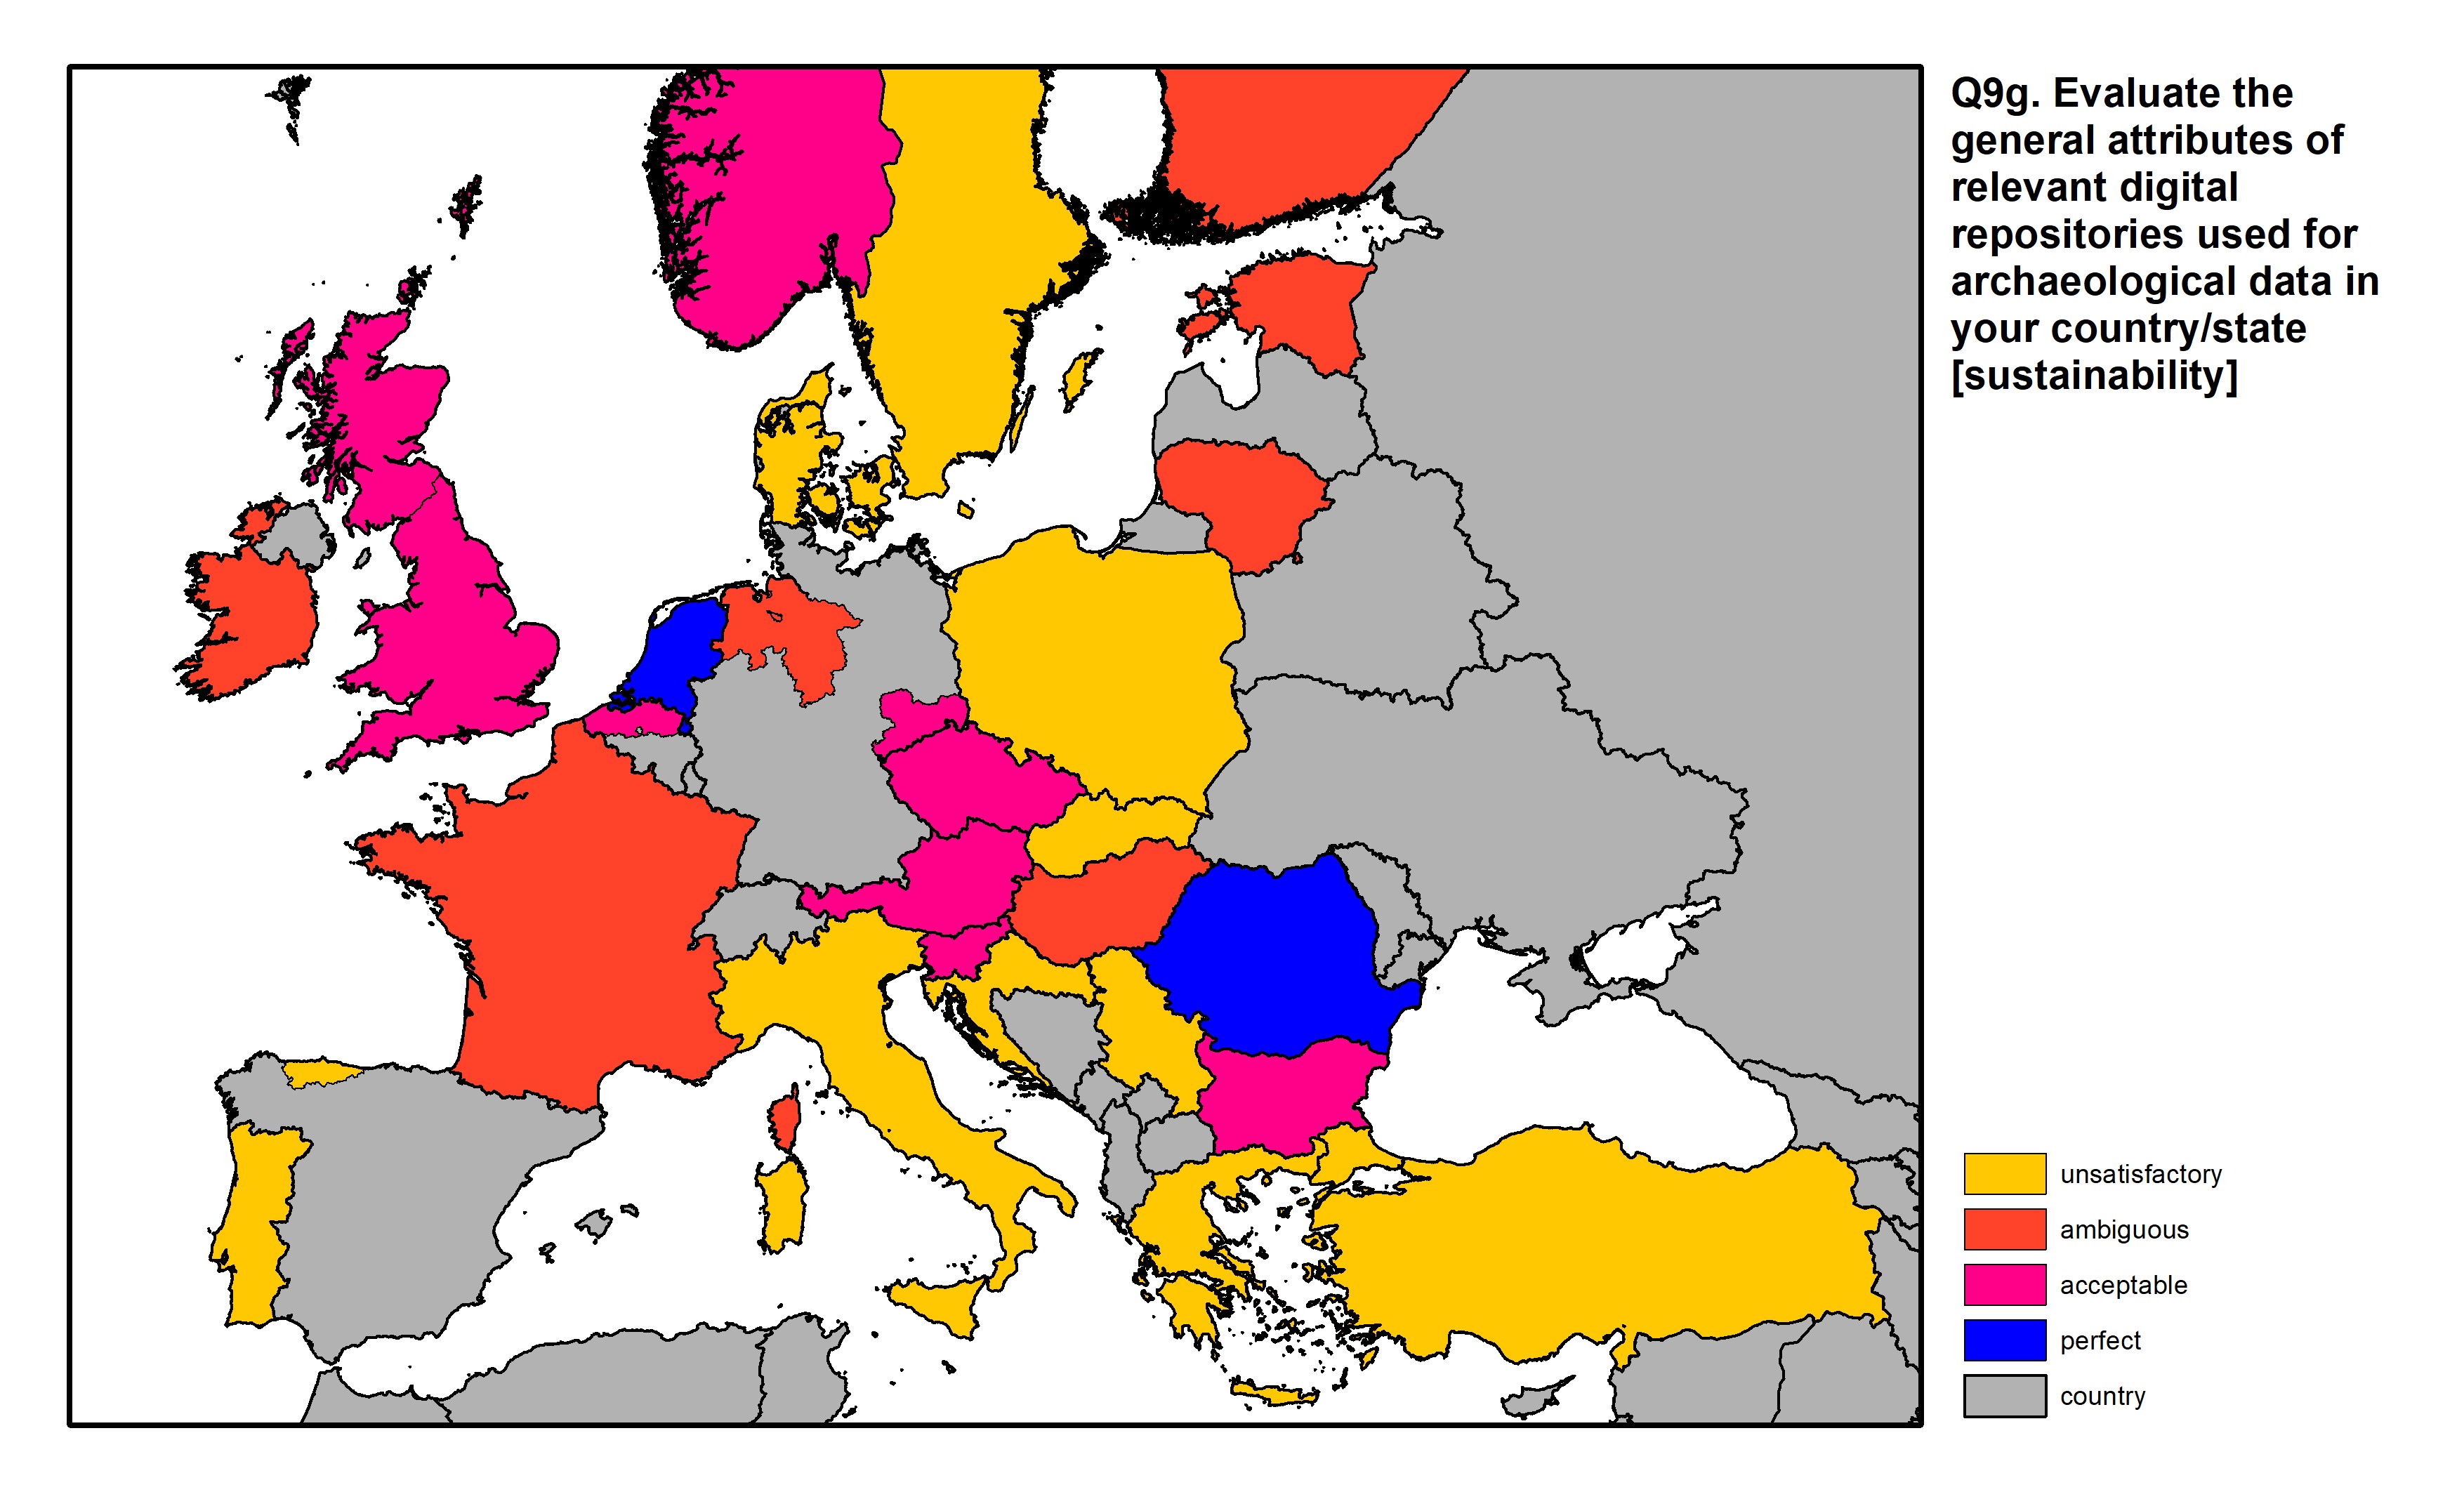 Figure 33: a map of Europe showing countries and regions in colour based on response rates to the survey question.